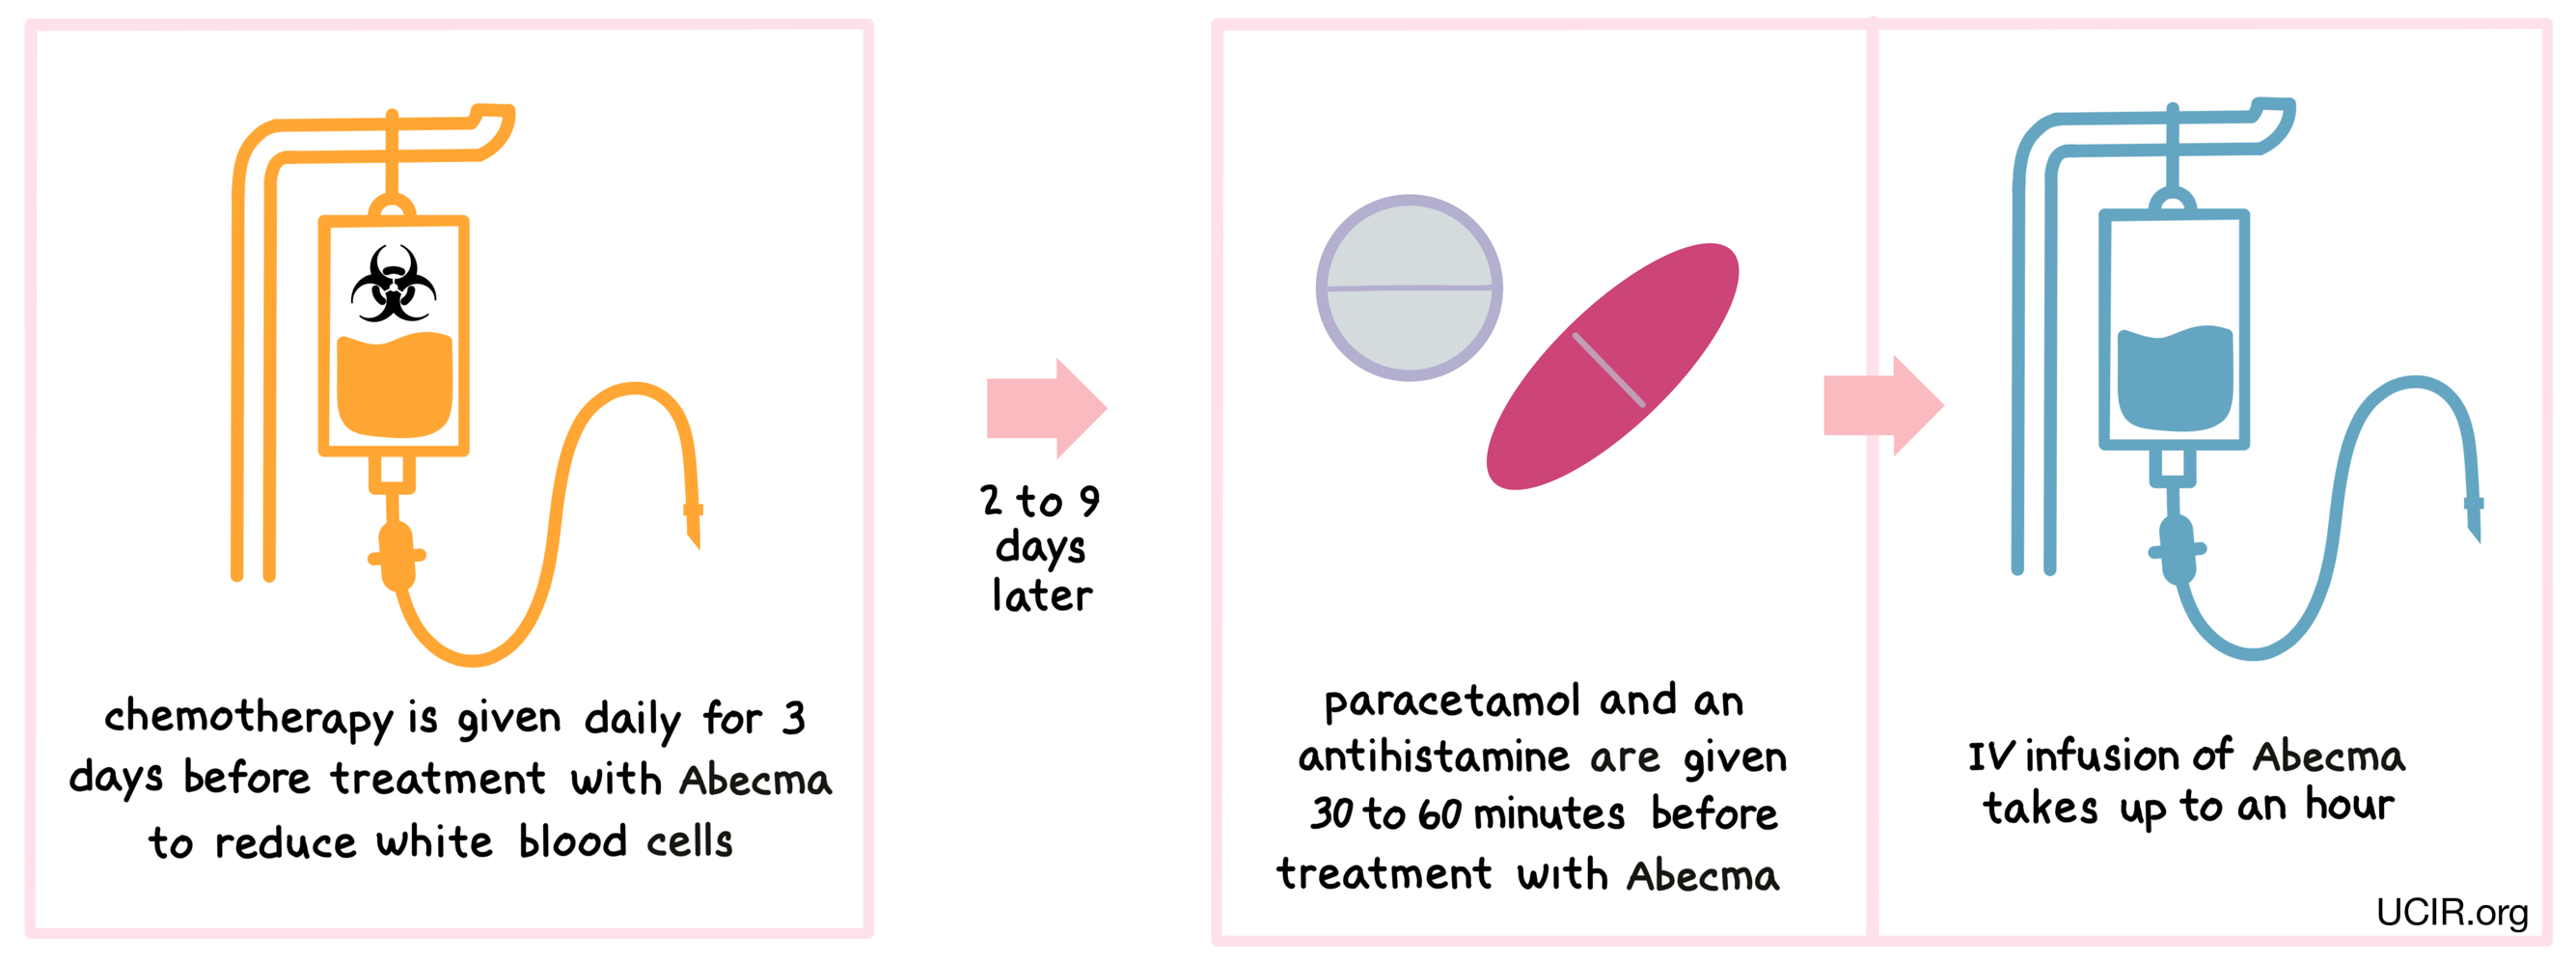 Illustration showing how Abecma is administered to patients